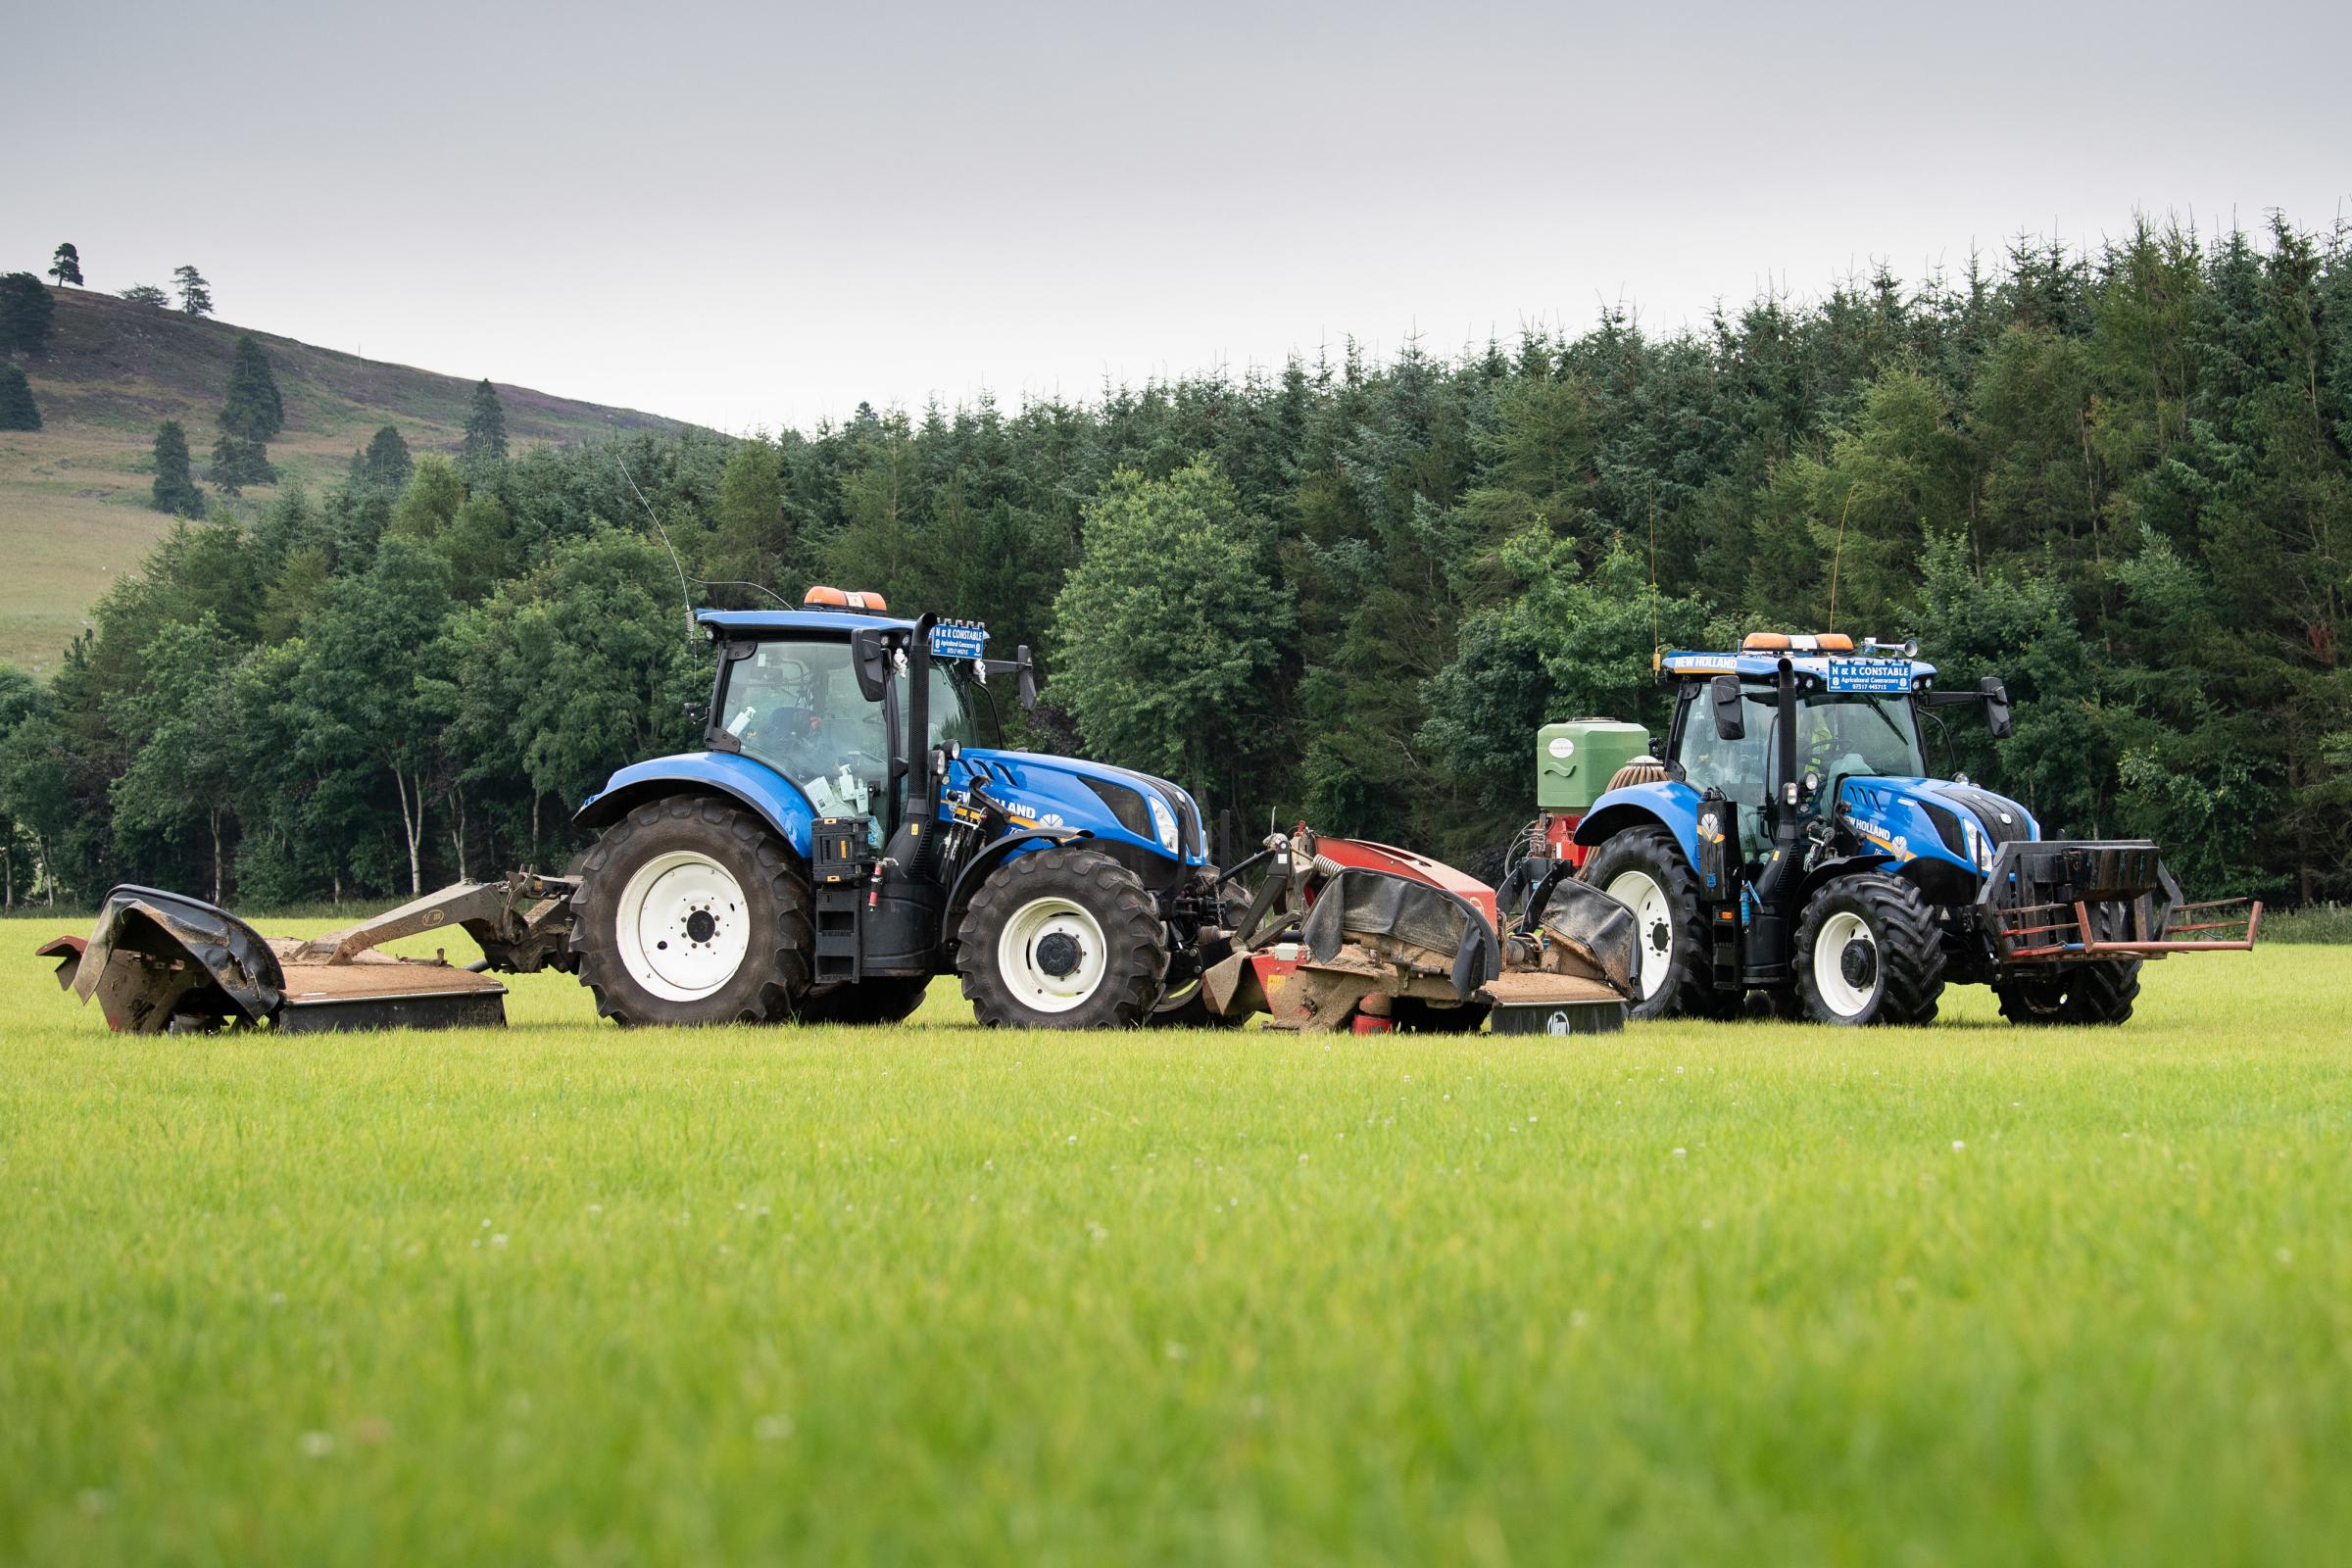 The Constables operate New Holland tractors from their base at Tomlea farm, Ballintuim near Blairgowie Ref:RH270721071 Rob Haining / The Scottish Farmer